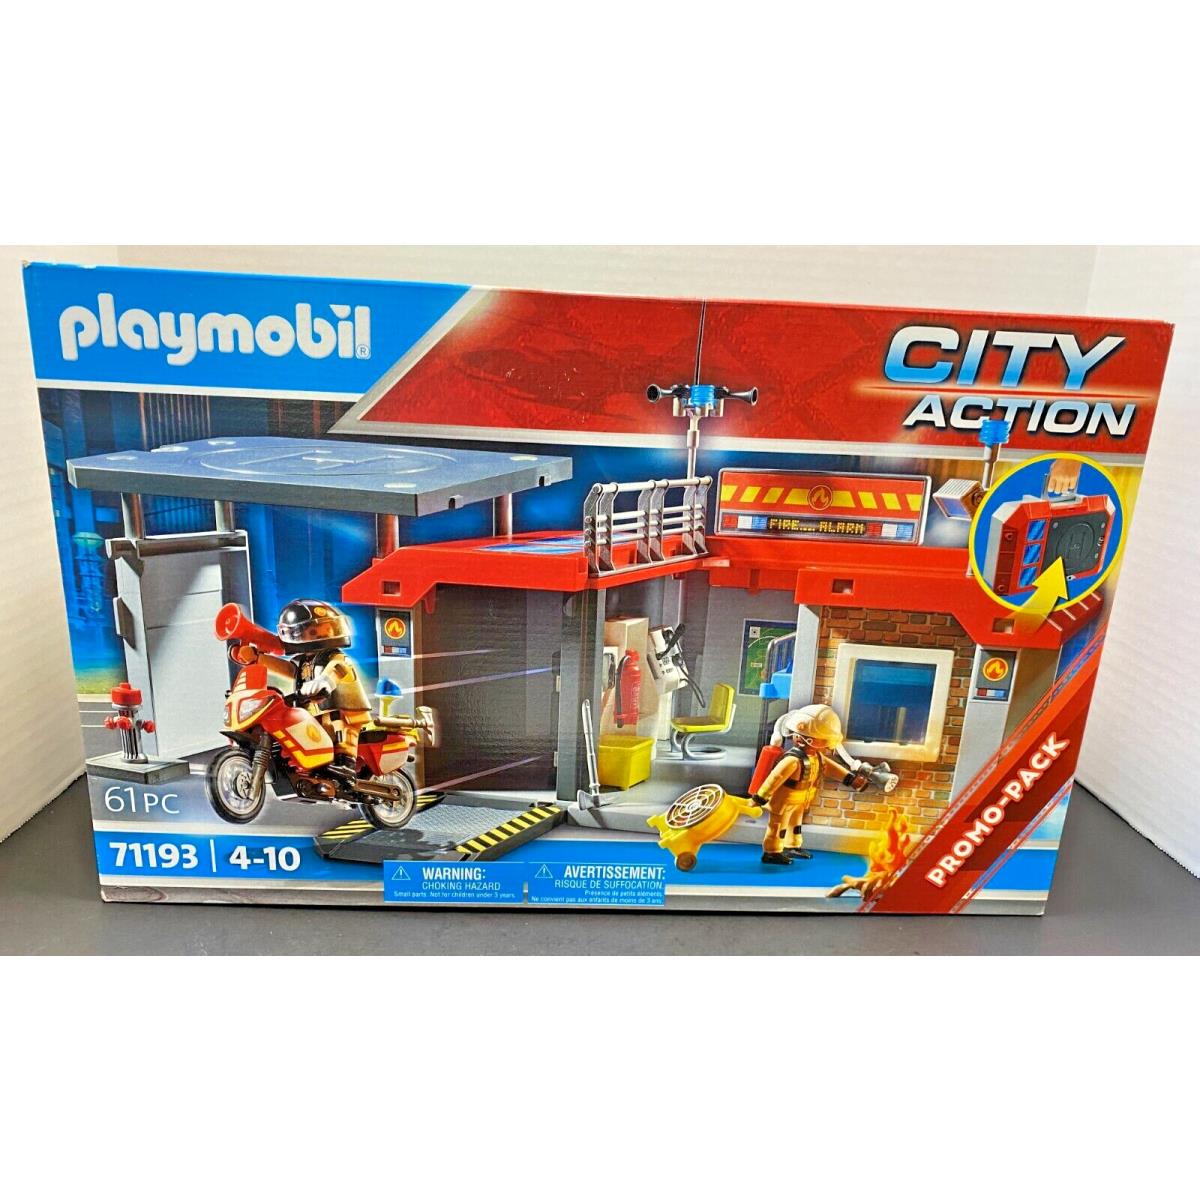 Playmobil City Action Promo-pack Firehouse 71193 Rare